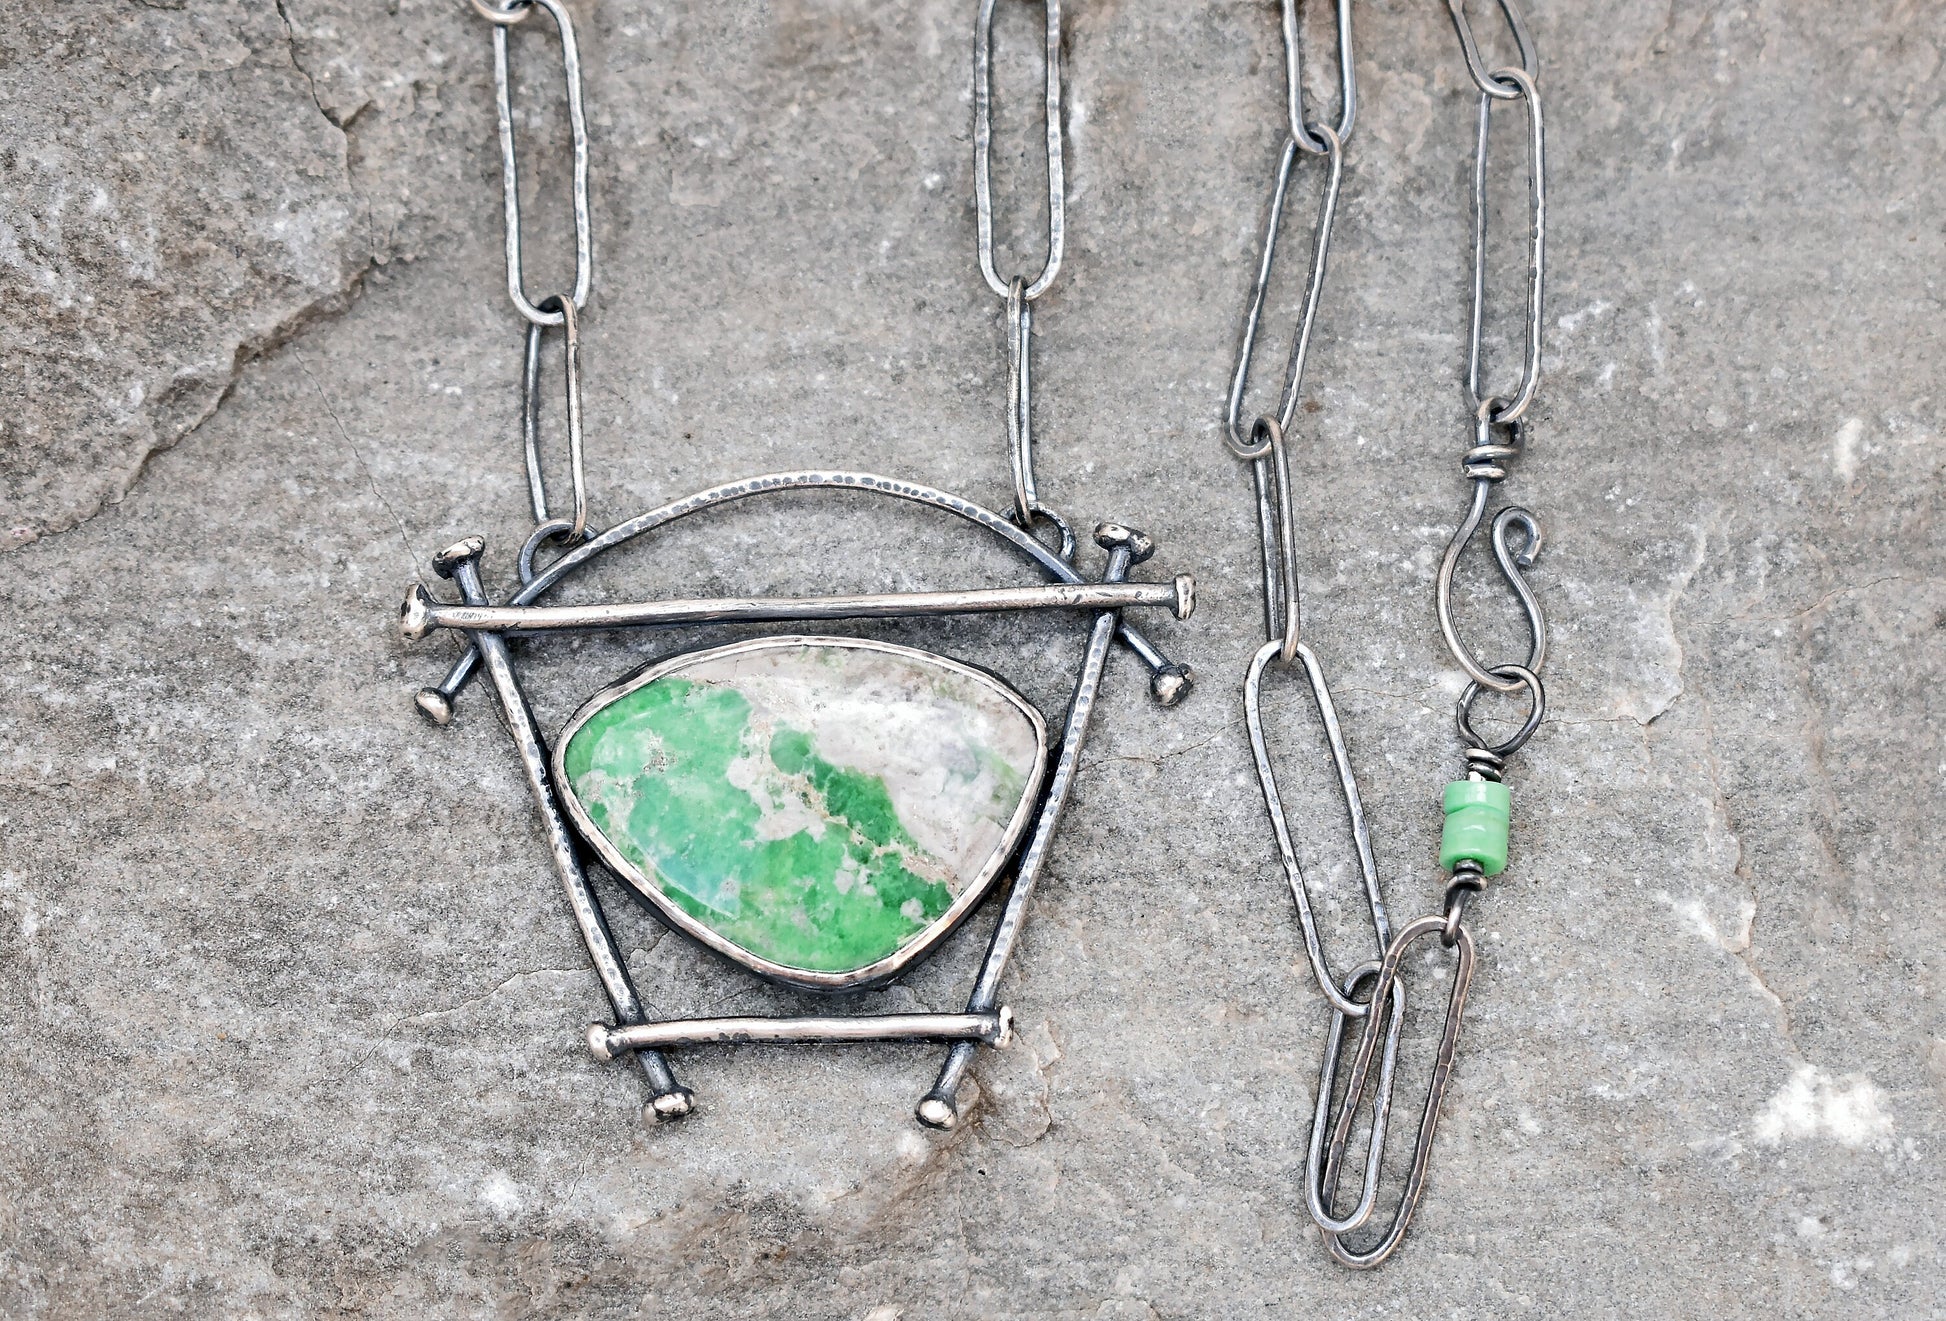 Variscite Necklace, Rustic Sterling Silver Artisan Pendant, Unique Green Stone, Organic Silversmith Jewelry, Metalsmith, Handmade Chain